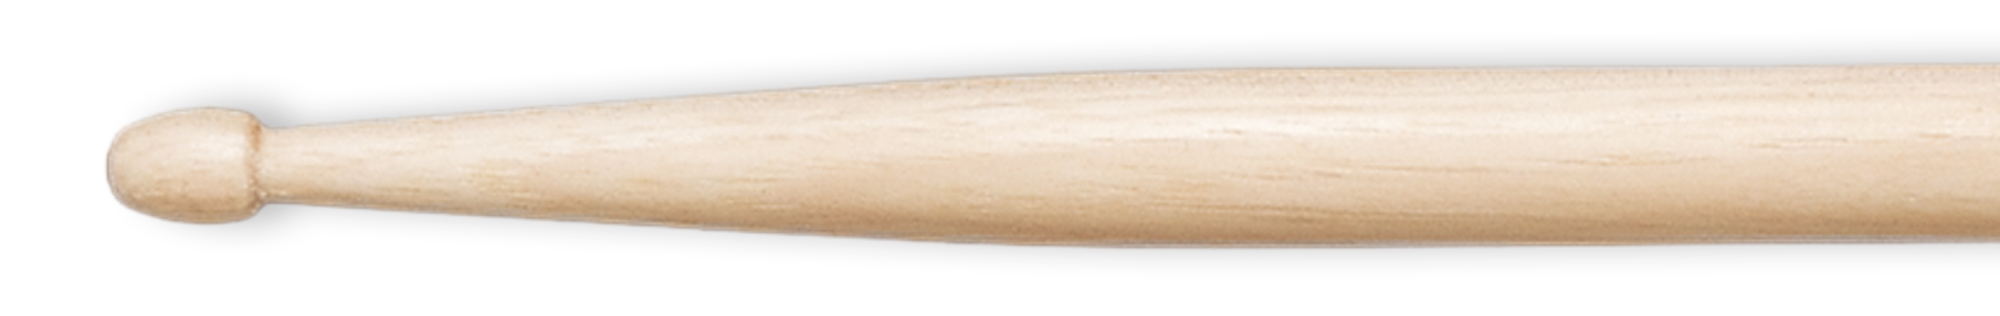 Vic Firth American Classic 5A Hickory Drumsticks (1 Paar)